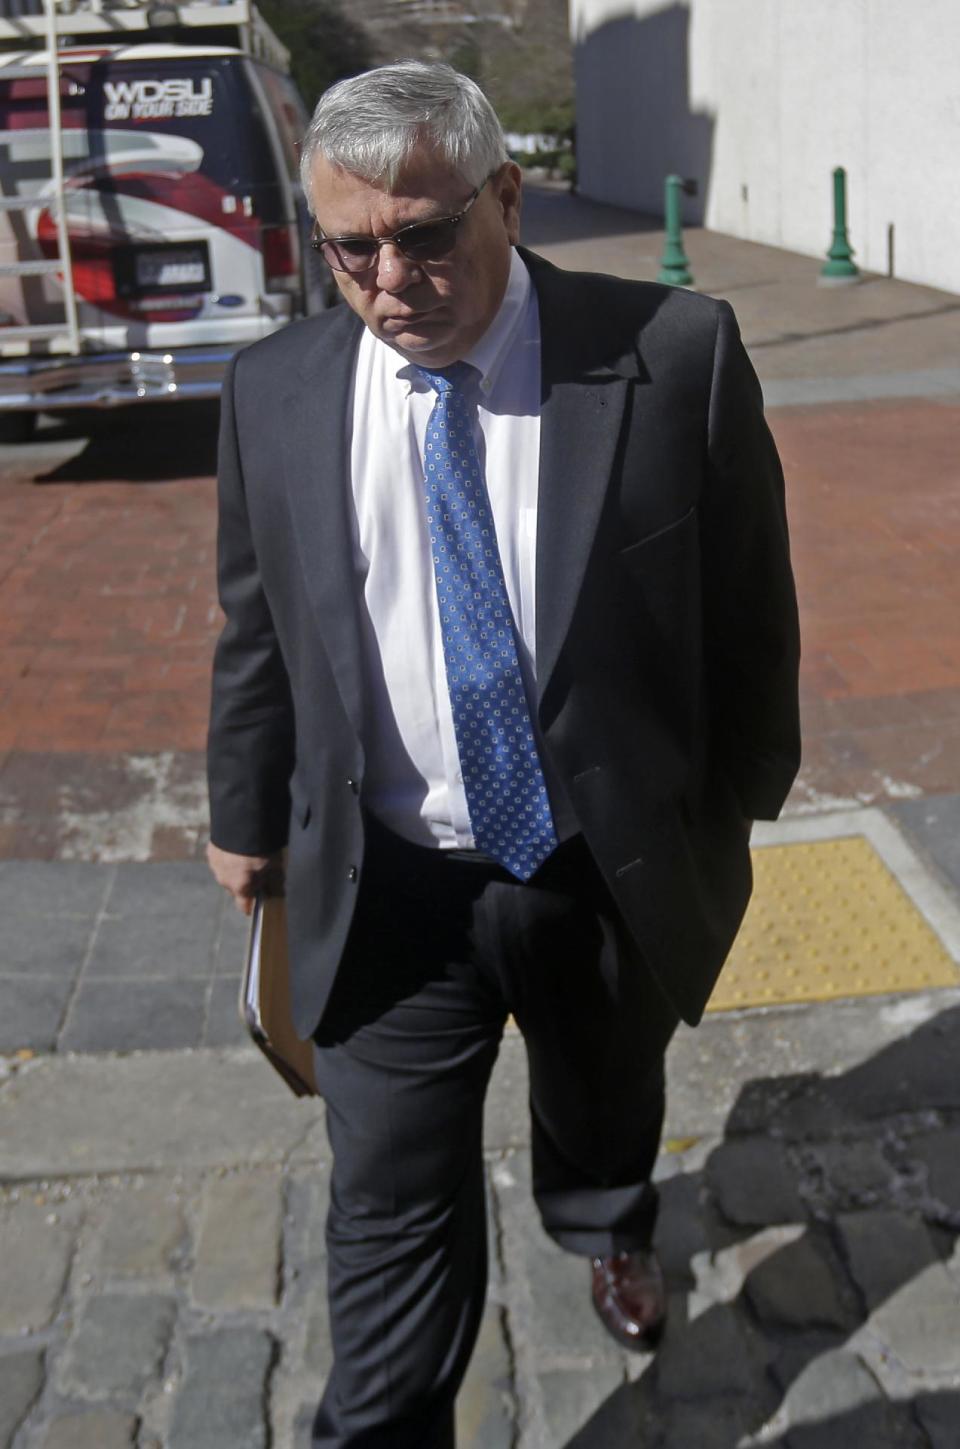 Anthony Badalamenti leaves Federal Court in New Orleans, Tuesday, Jan. 21, 2014. The former Halliburton manager was sentenced Tuesday to one year of probation for destroying evidence in the aftermath of BP's massive 2010 oil spill in the Gulf of Mexico. Badalamenti, of Katy, Texas, had faced a maximum of one year in prison at his sentencing by U.S. District Judge Jay Zainey. Badalamenti pleaded guilty in October to one misdemeanor count of destruction of evidence. (AP Photo/Gerald Herbert)